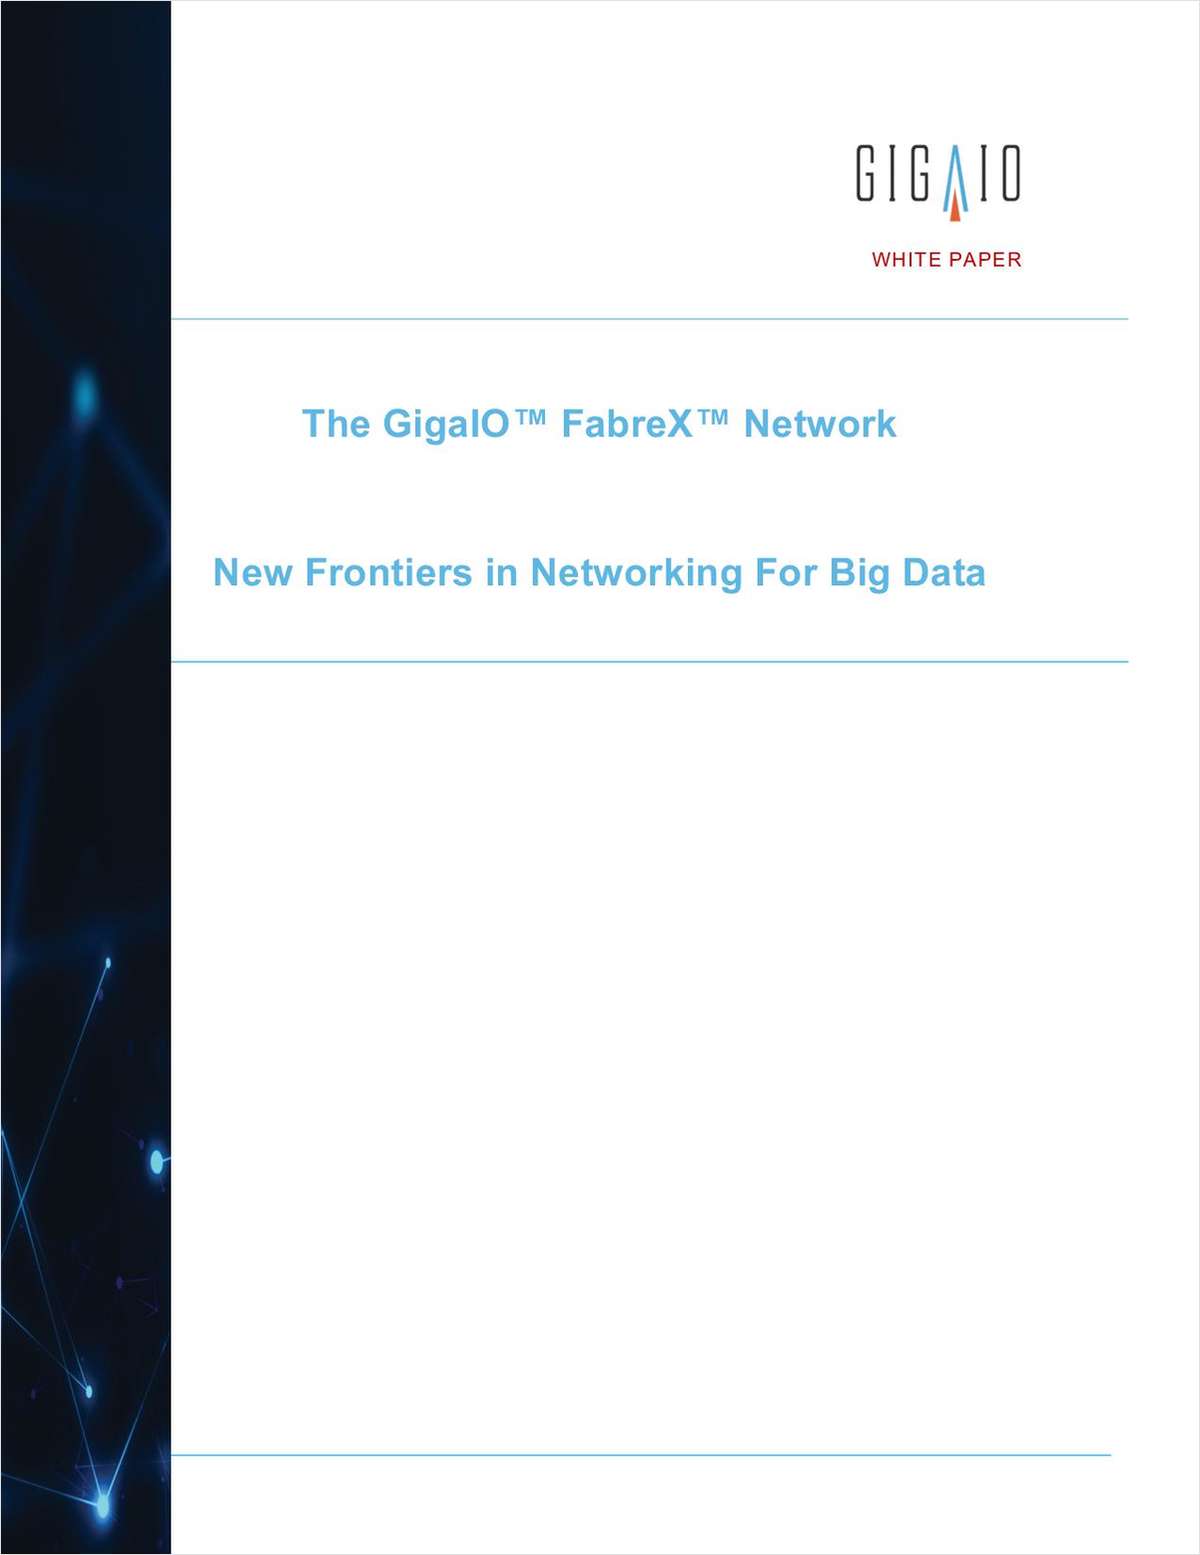 The GigaIO™ FabreX™ Network -- New Frontiers in Networking For Big Data